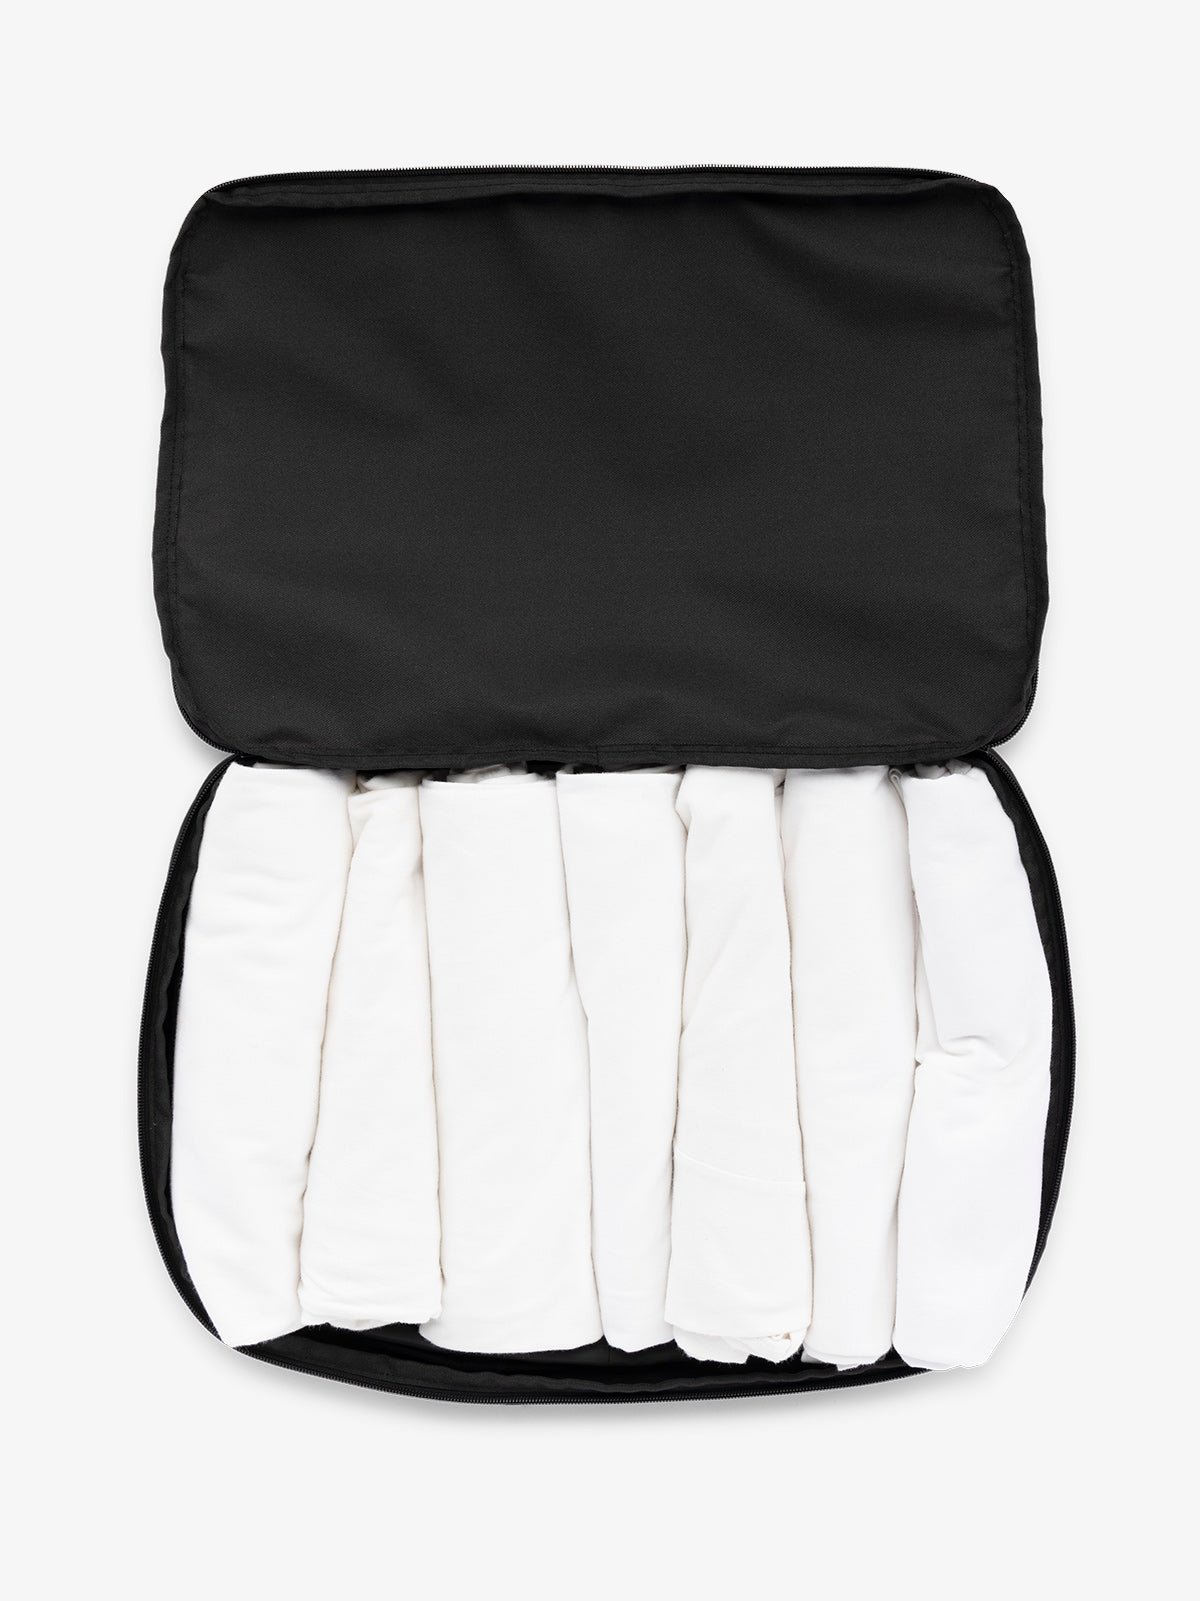 CALPAK large packing cubes for travel made with durable material in black